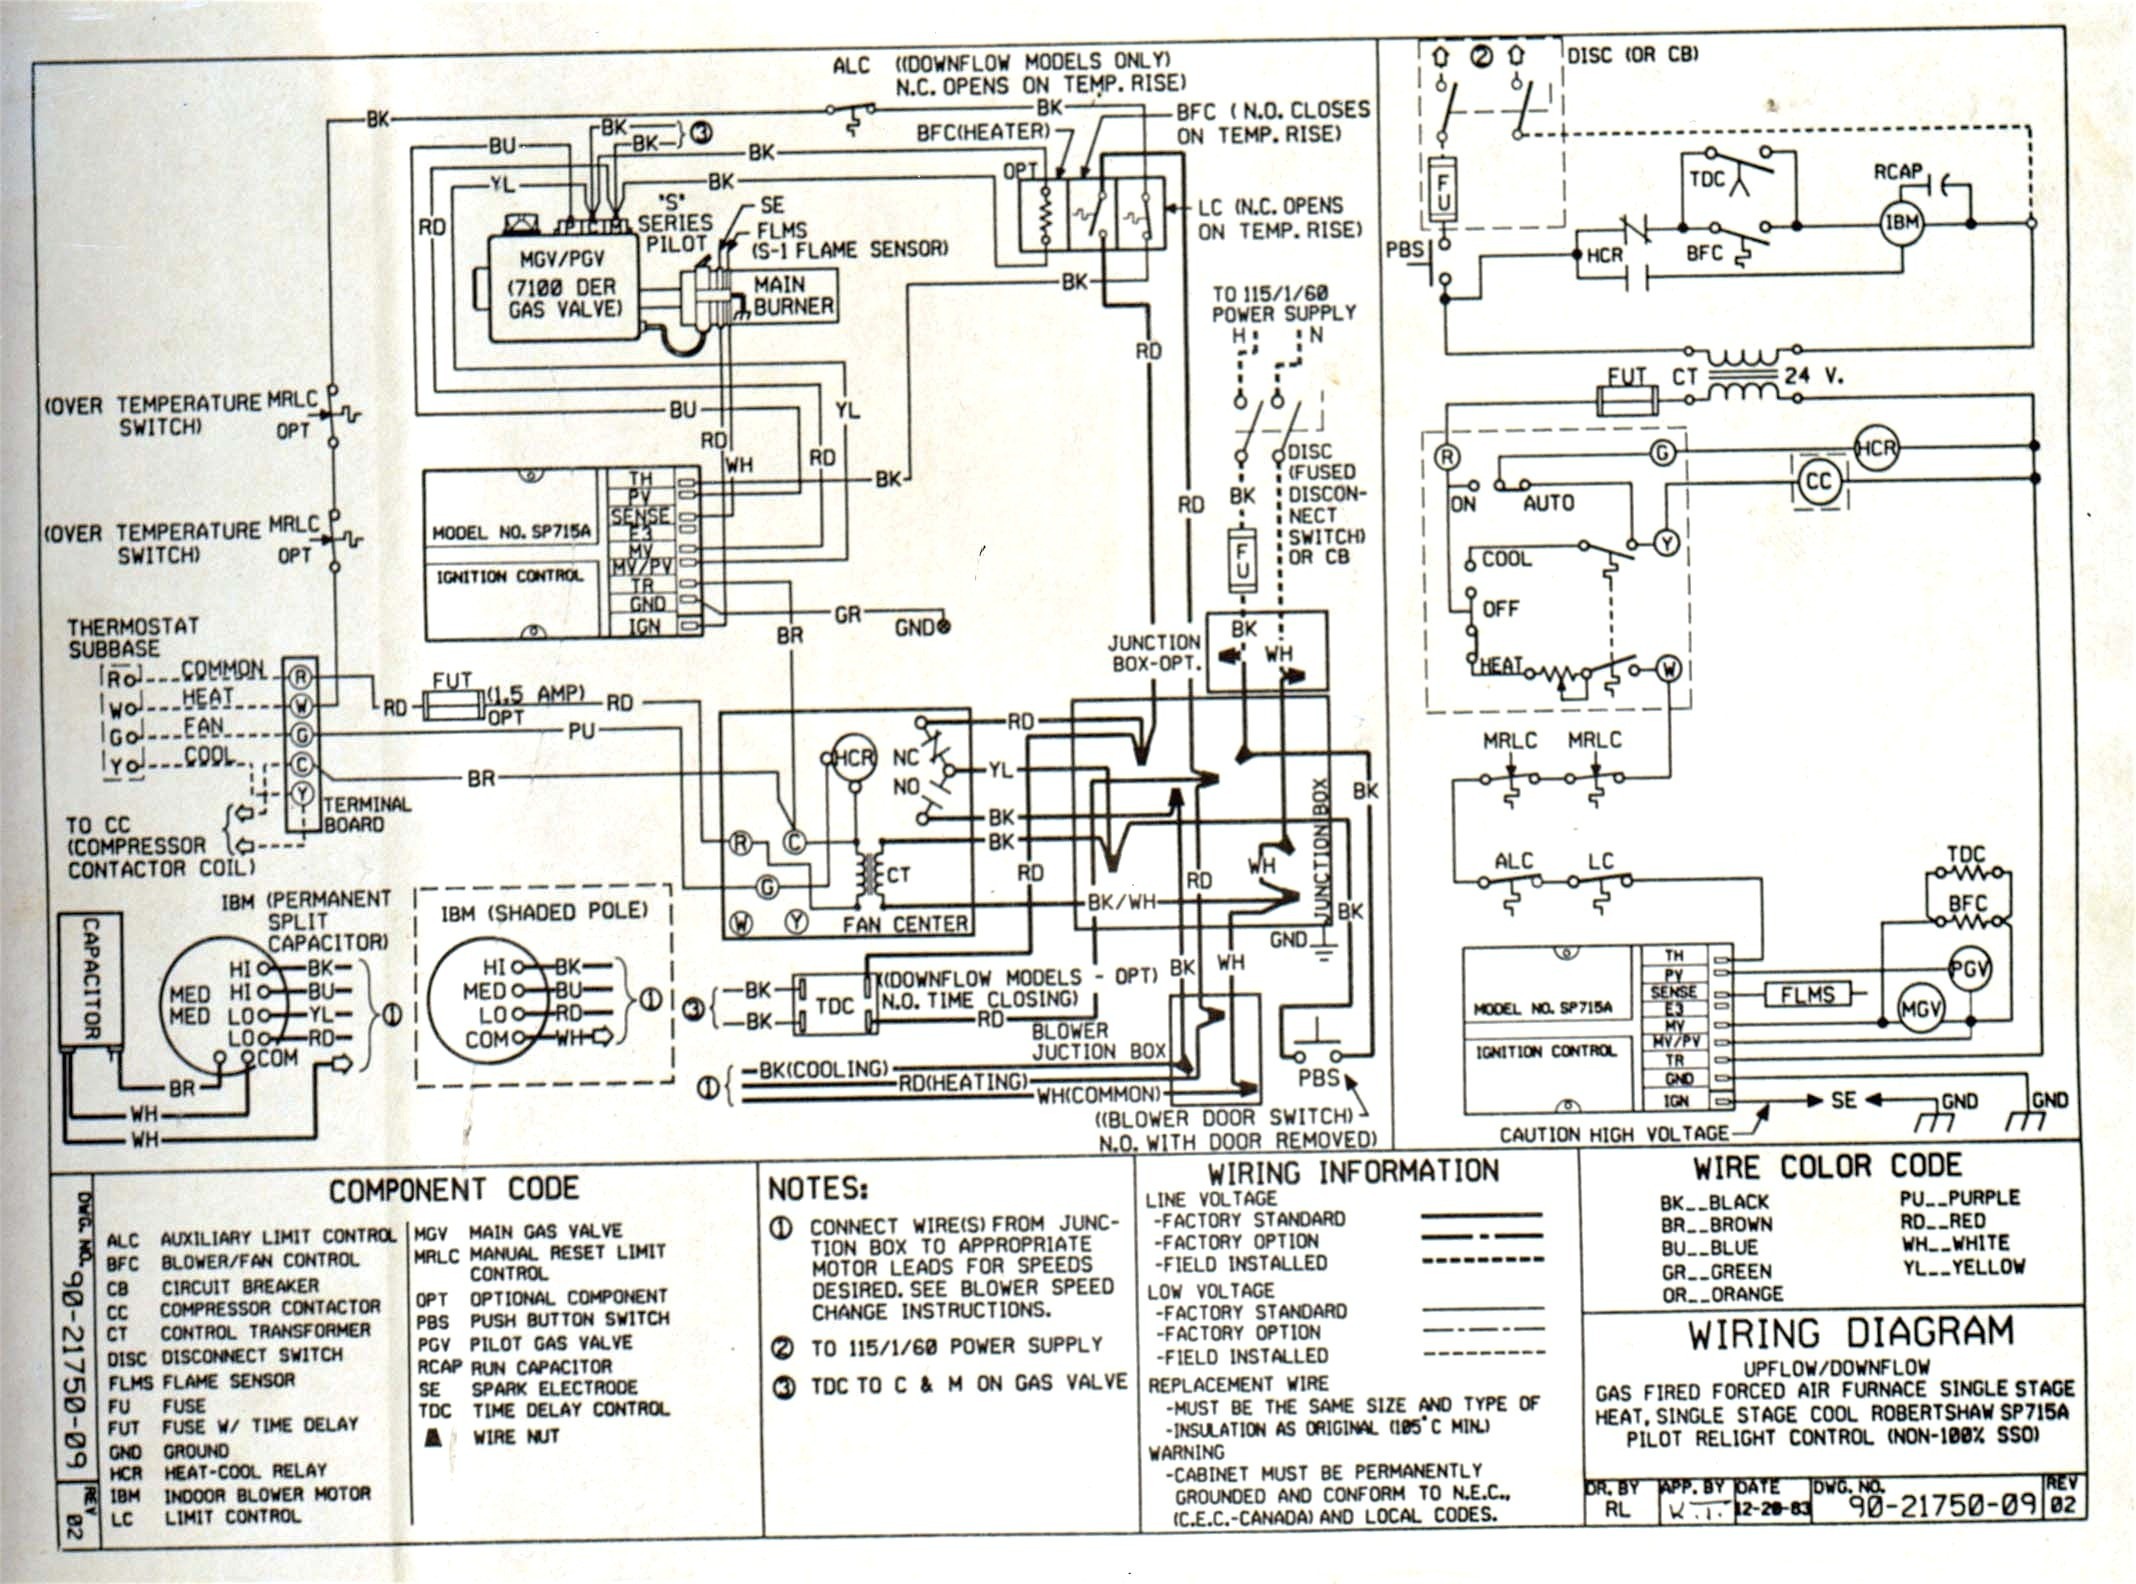 House Ac Wiring Diagram Fresh Wiring Diagram for Ac System New Wiring Diagrams for Central Heating